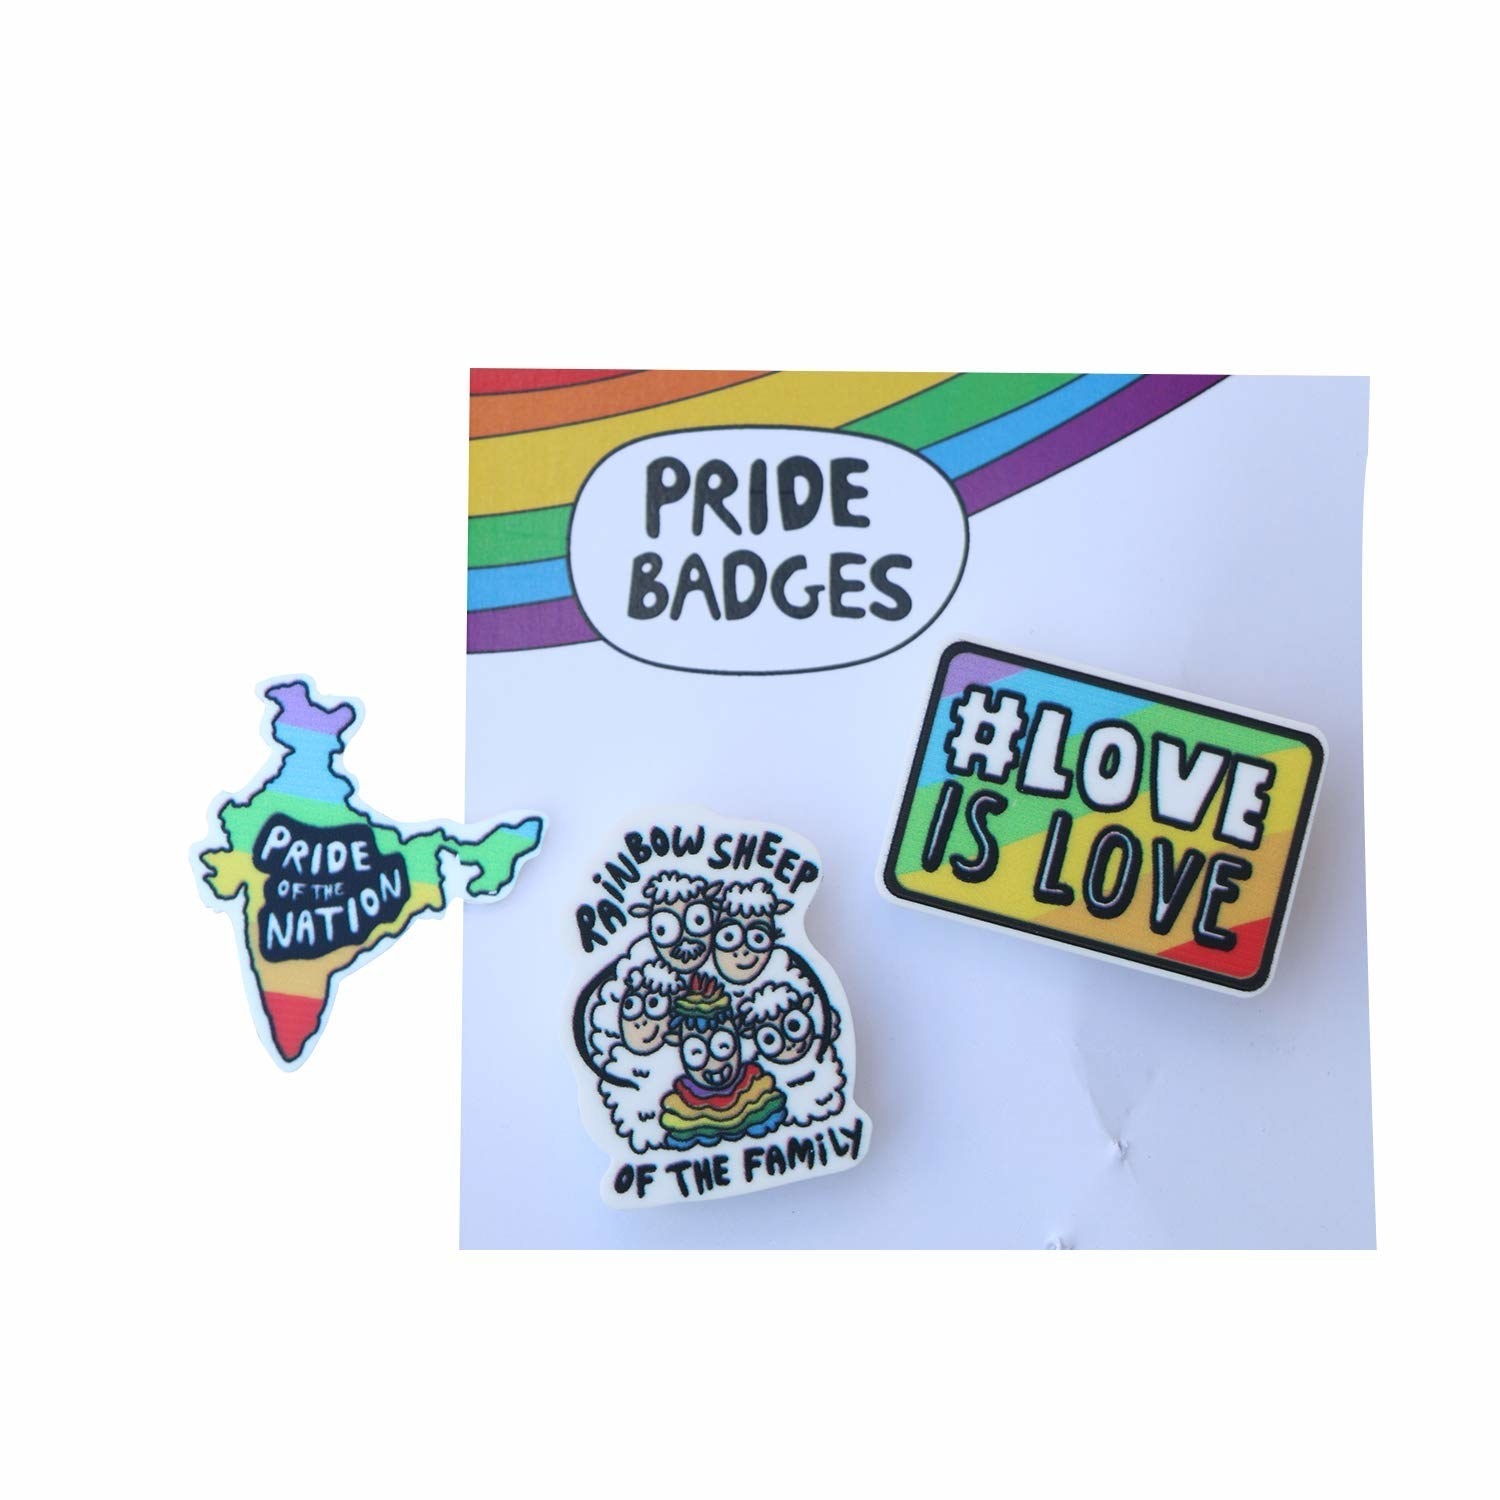 Rainbow coloured pins that say &#x27;Love is love&#x27;, &#x27;Pride of the nation&#x27; and &#x27;Rainbow sheep of the family&#x27;